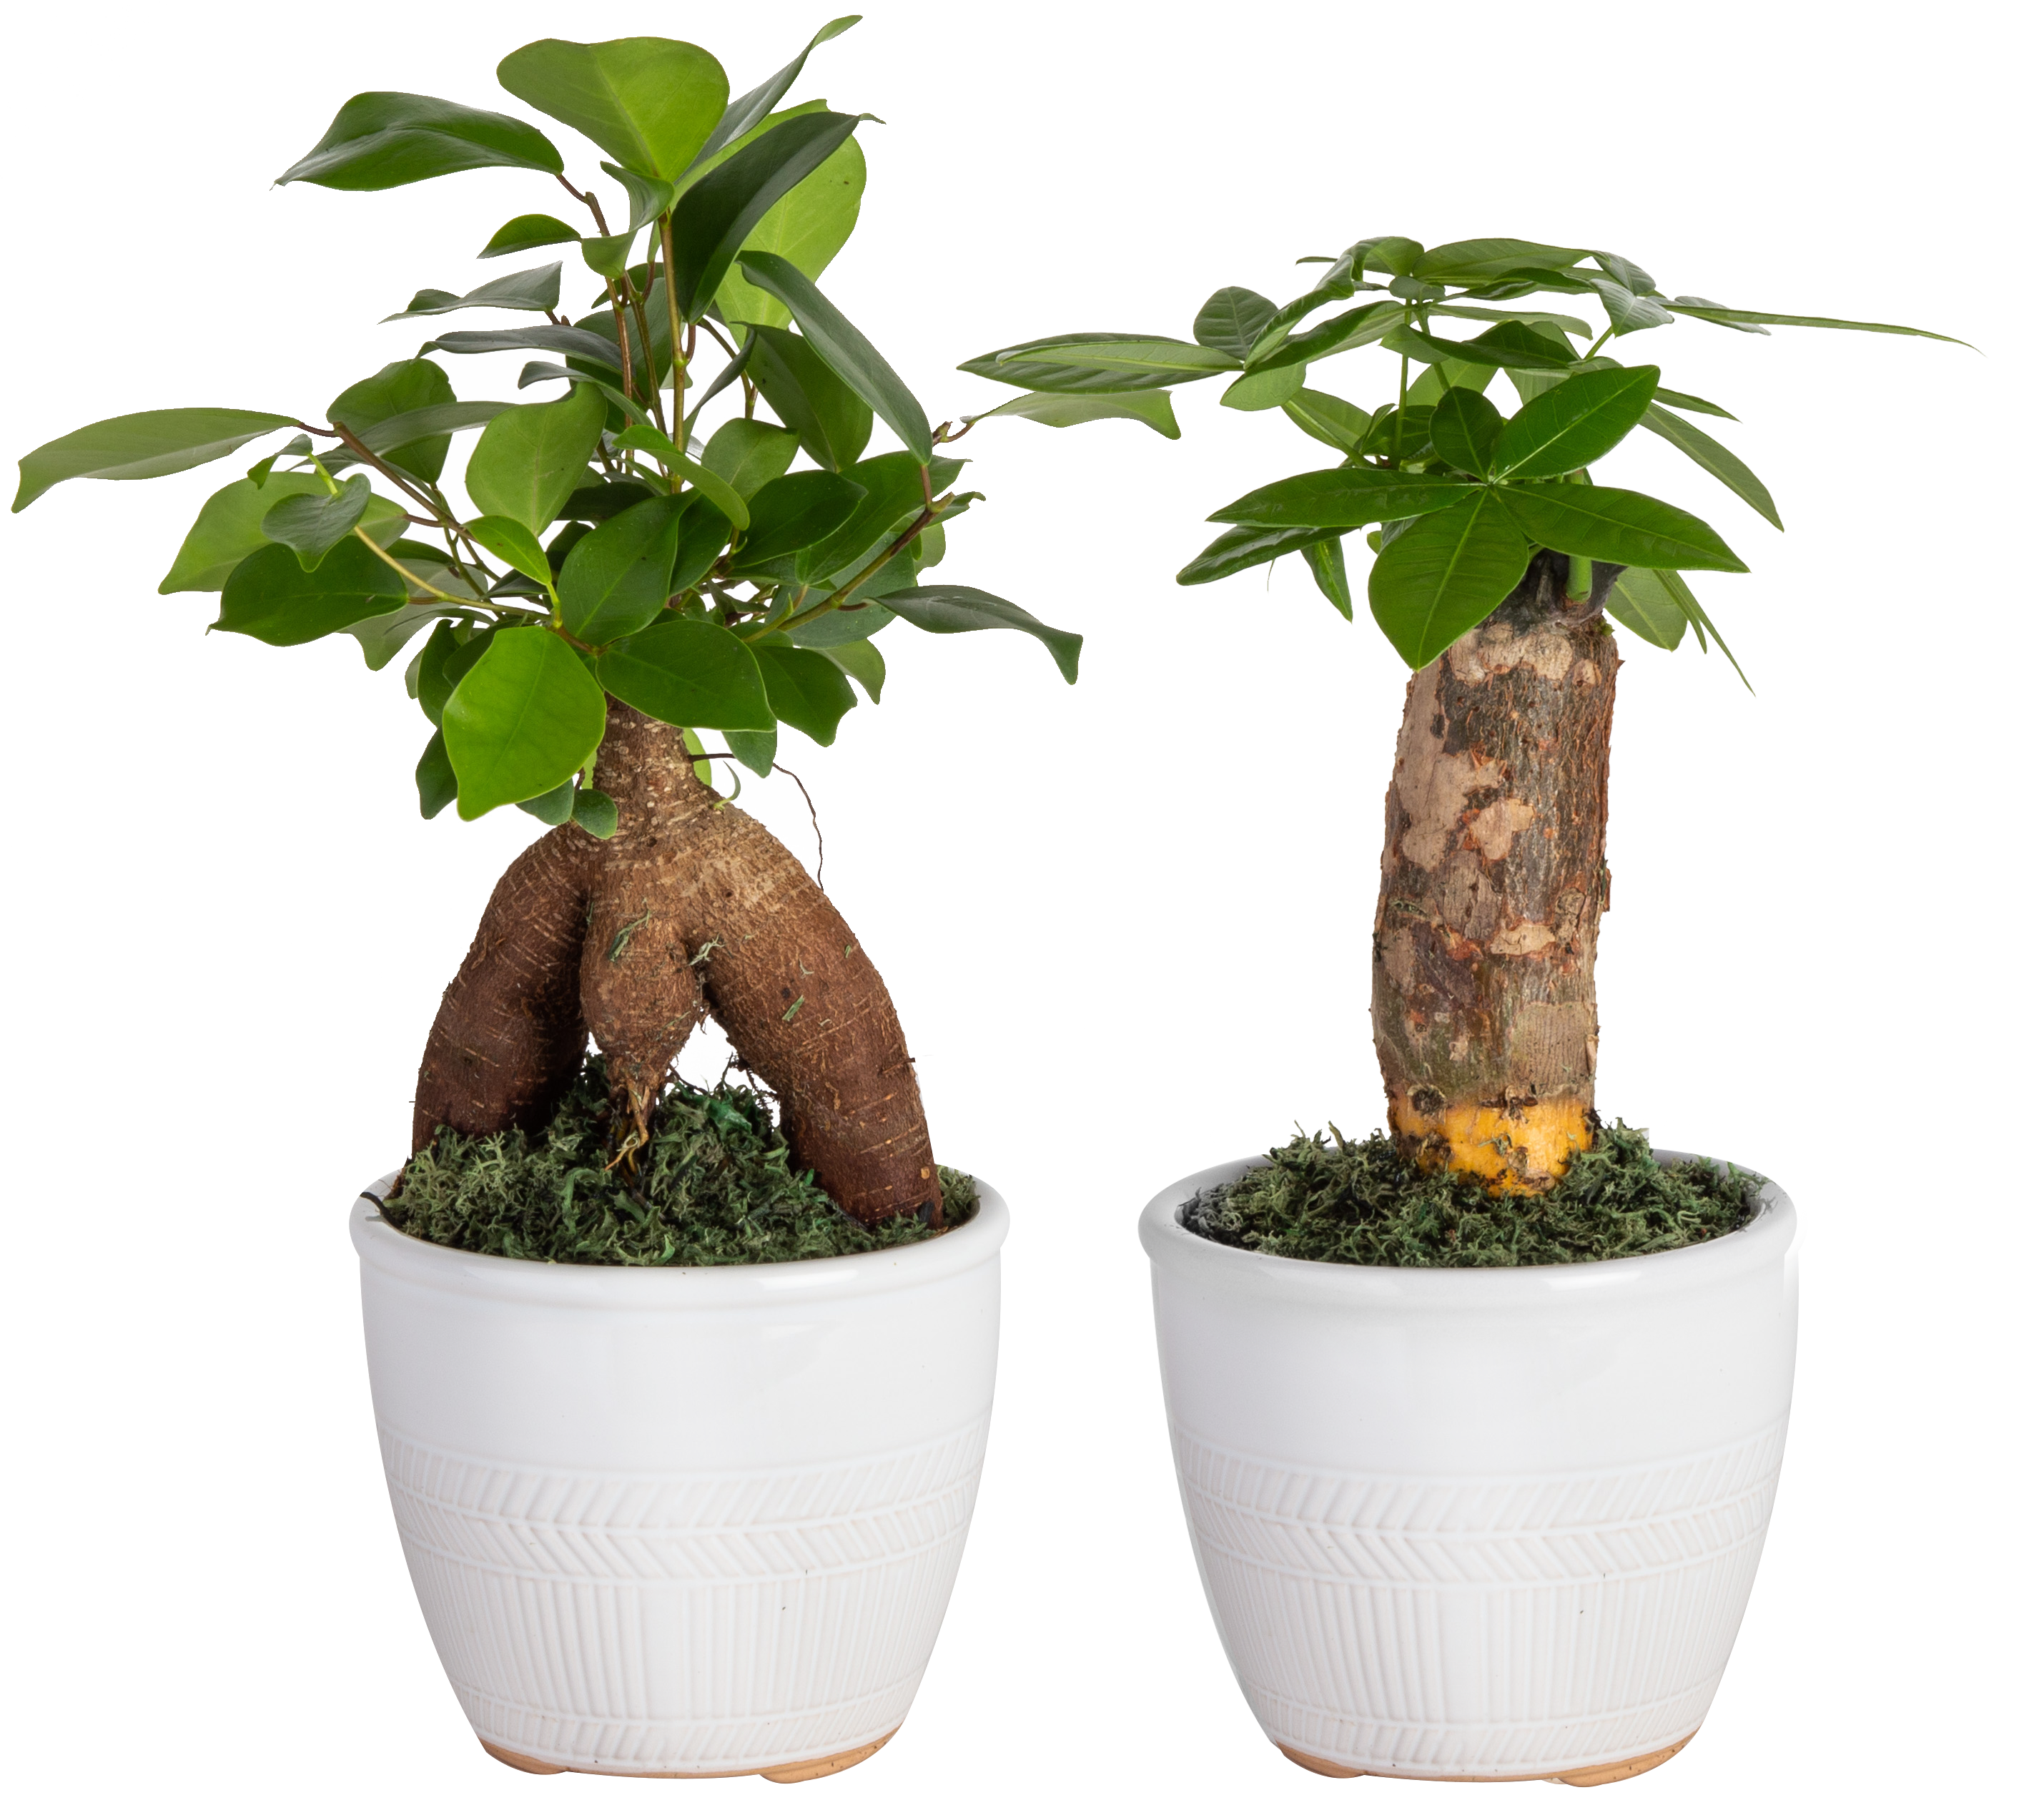 Costa Farms Ficus Ginseng Stump Bonsai Pachira Planter 2-Pack in House House at Plants the Plant department 5-in in and